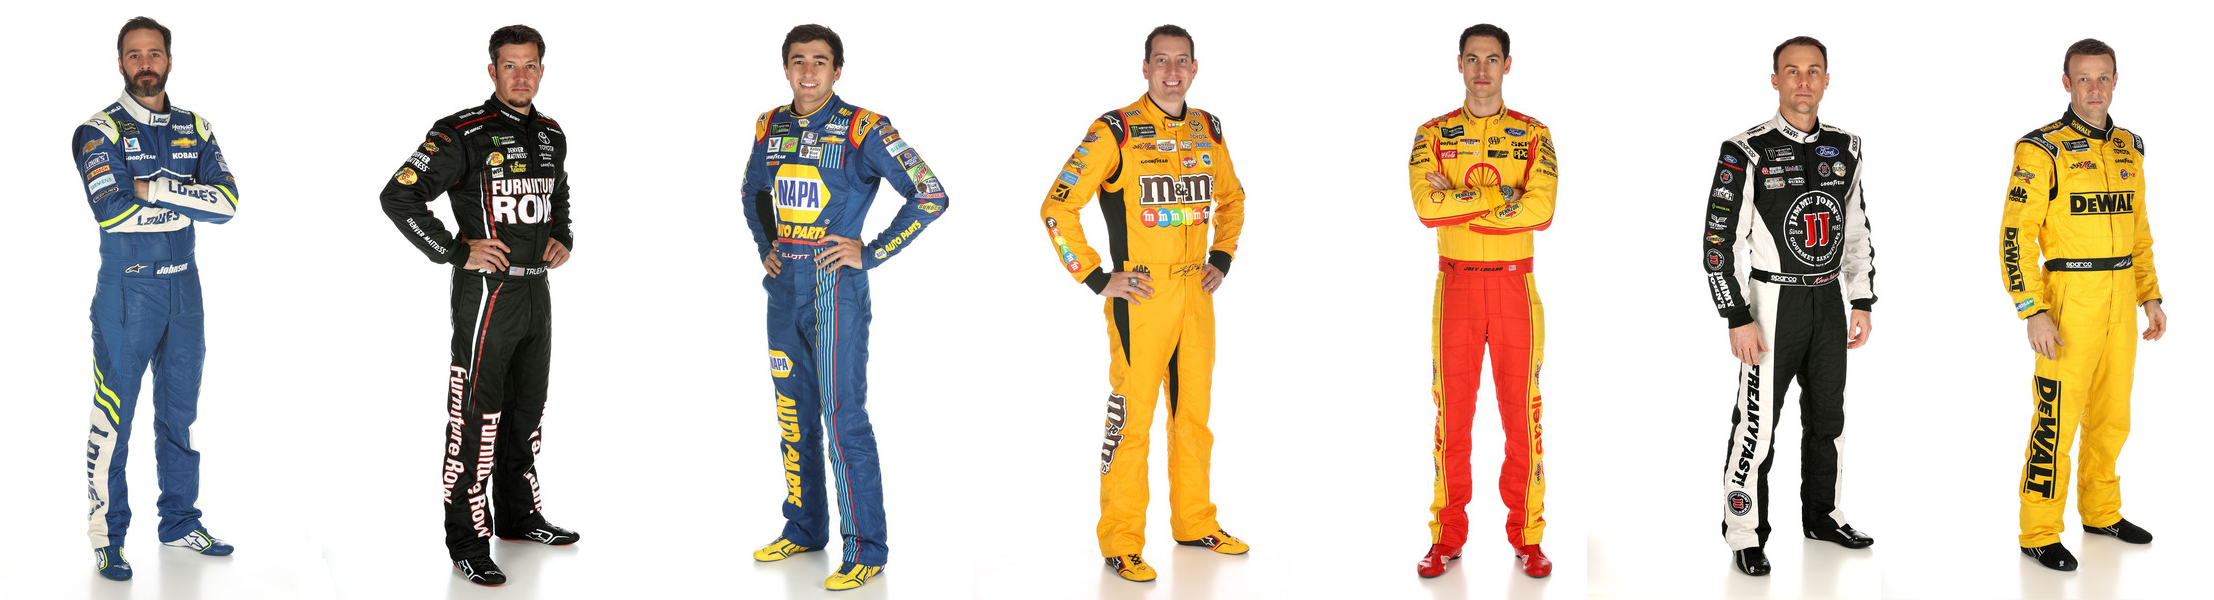 Which of these seven star racers takes the win at Dover?